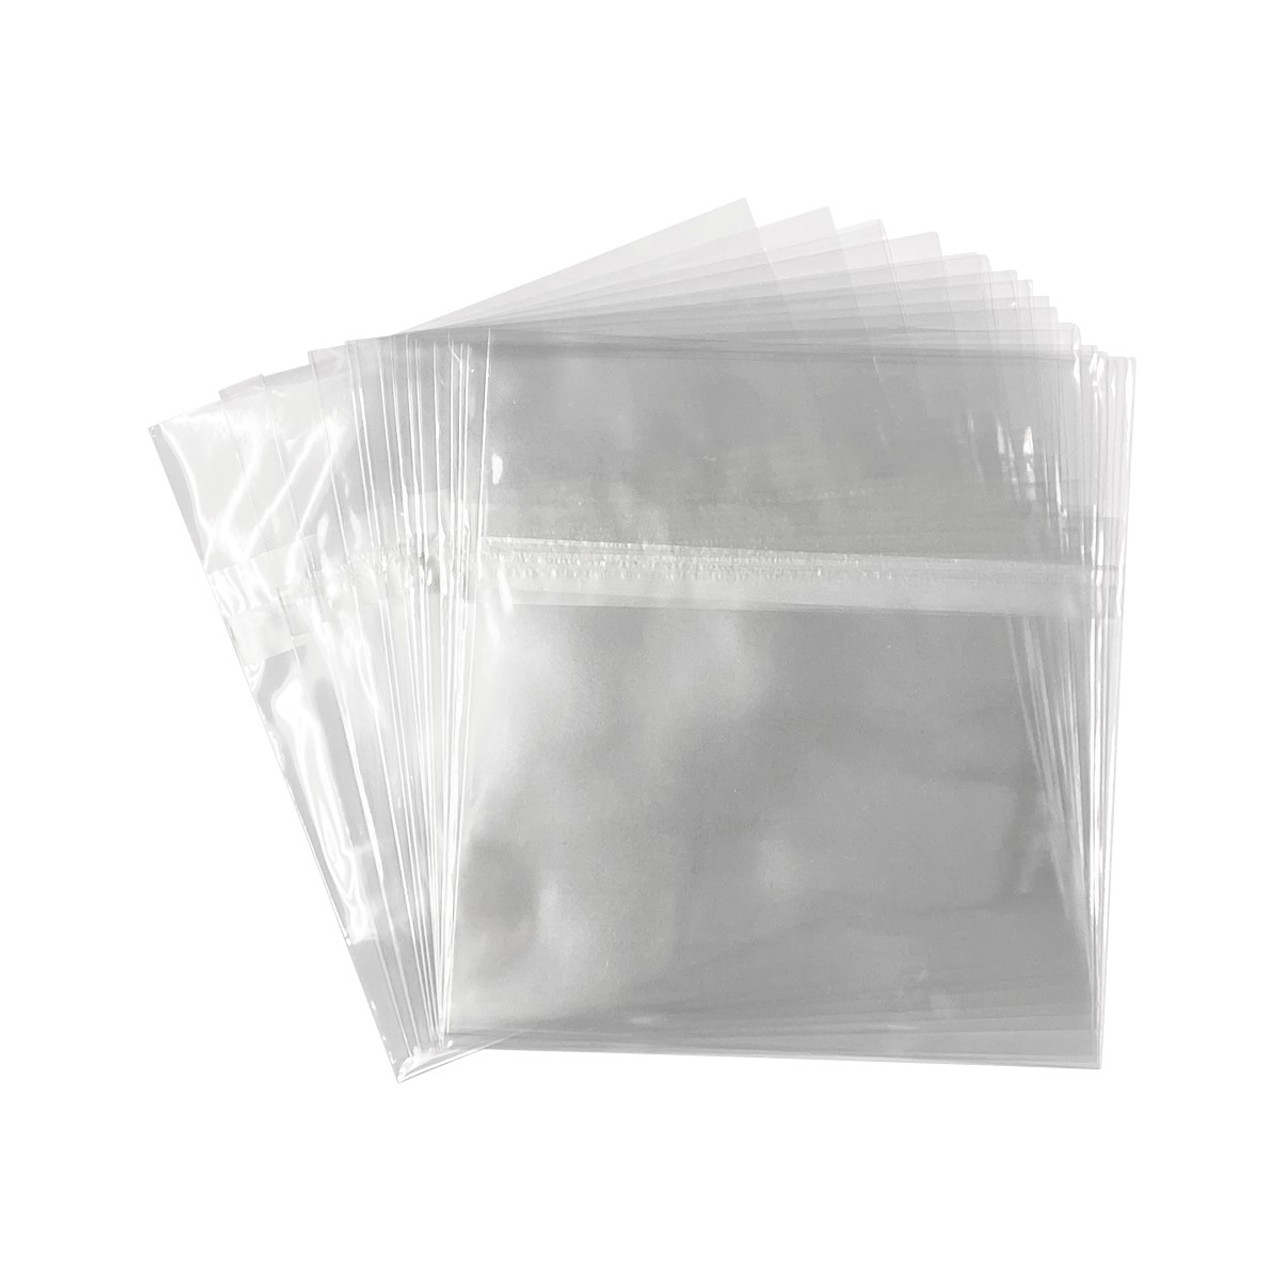 Are Resealable Zip Lock Bags Food Safe?